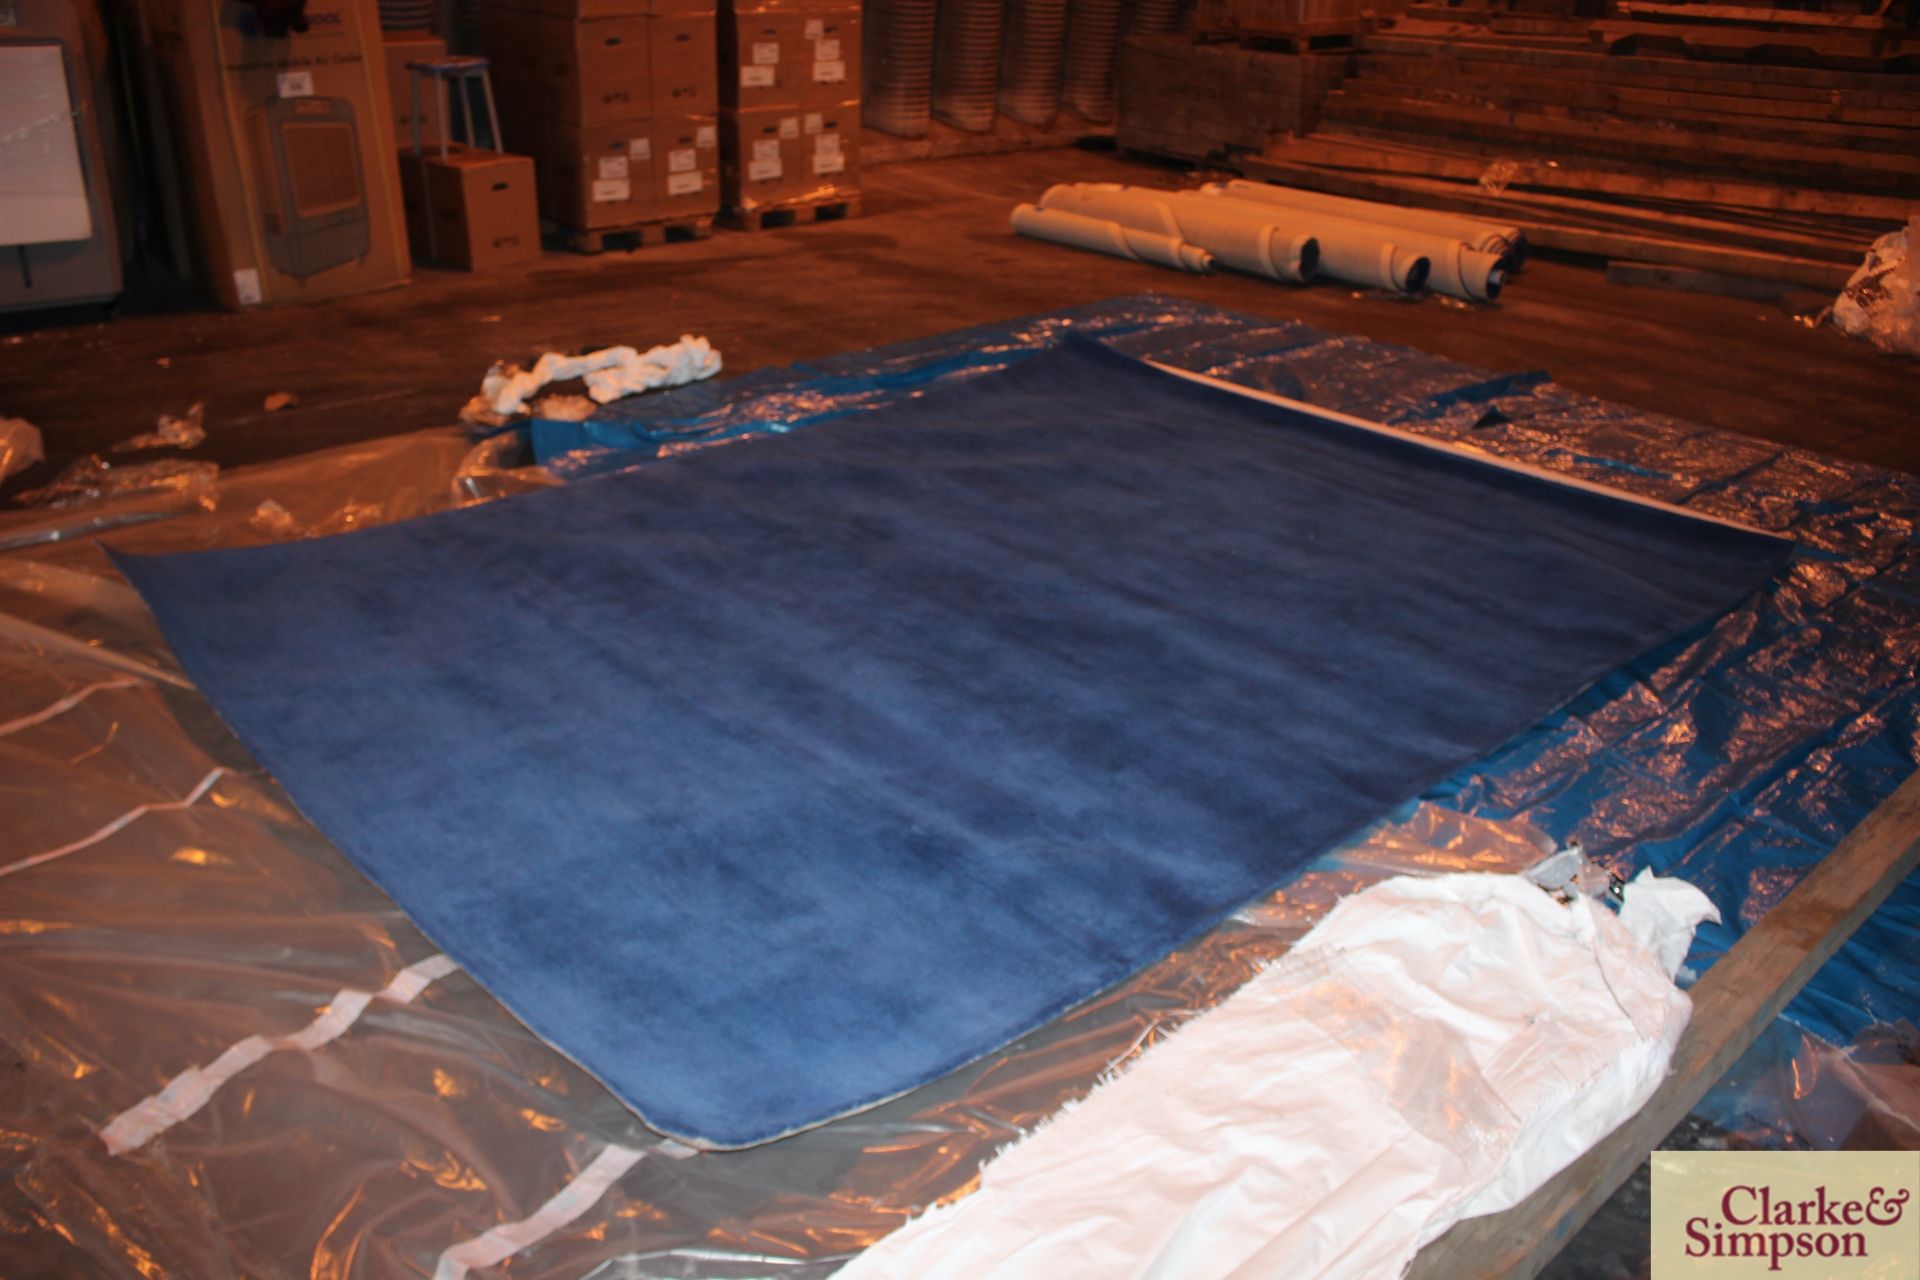 275cm x 350cm square blue 100% Indian wool rug (C8). - Image 4 of 6